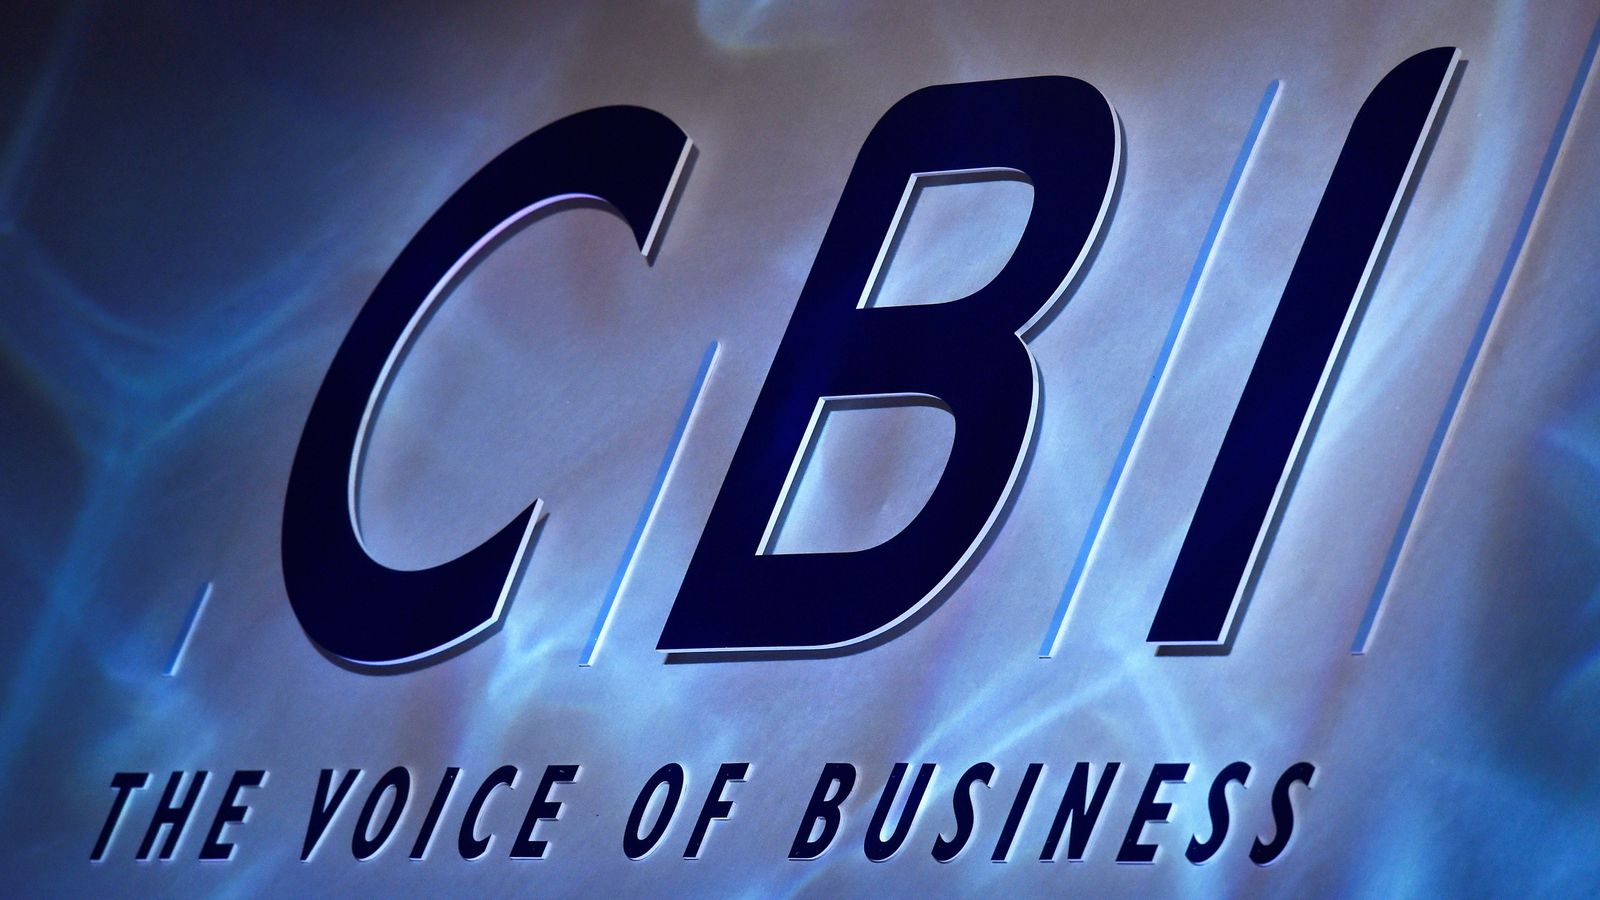 CBI in talks about tie-up with manufacturers' body Make UK